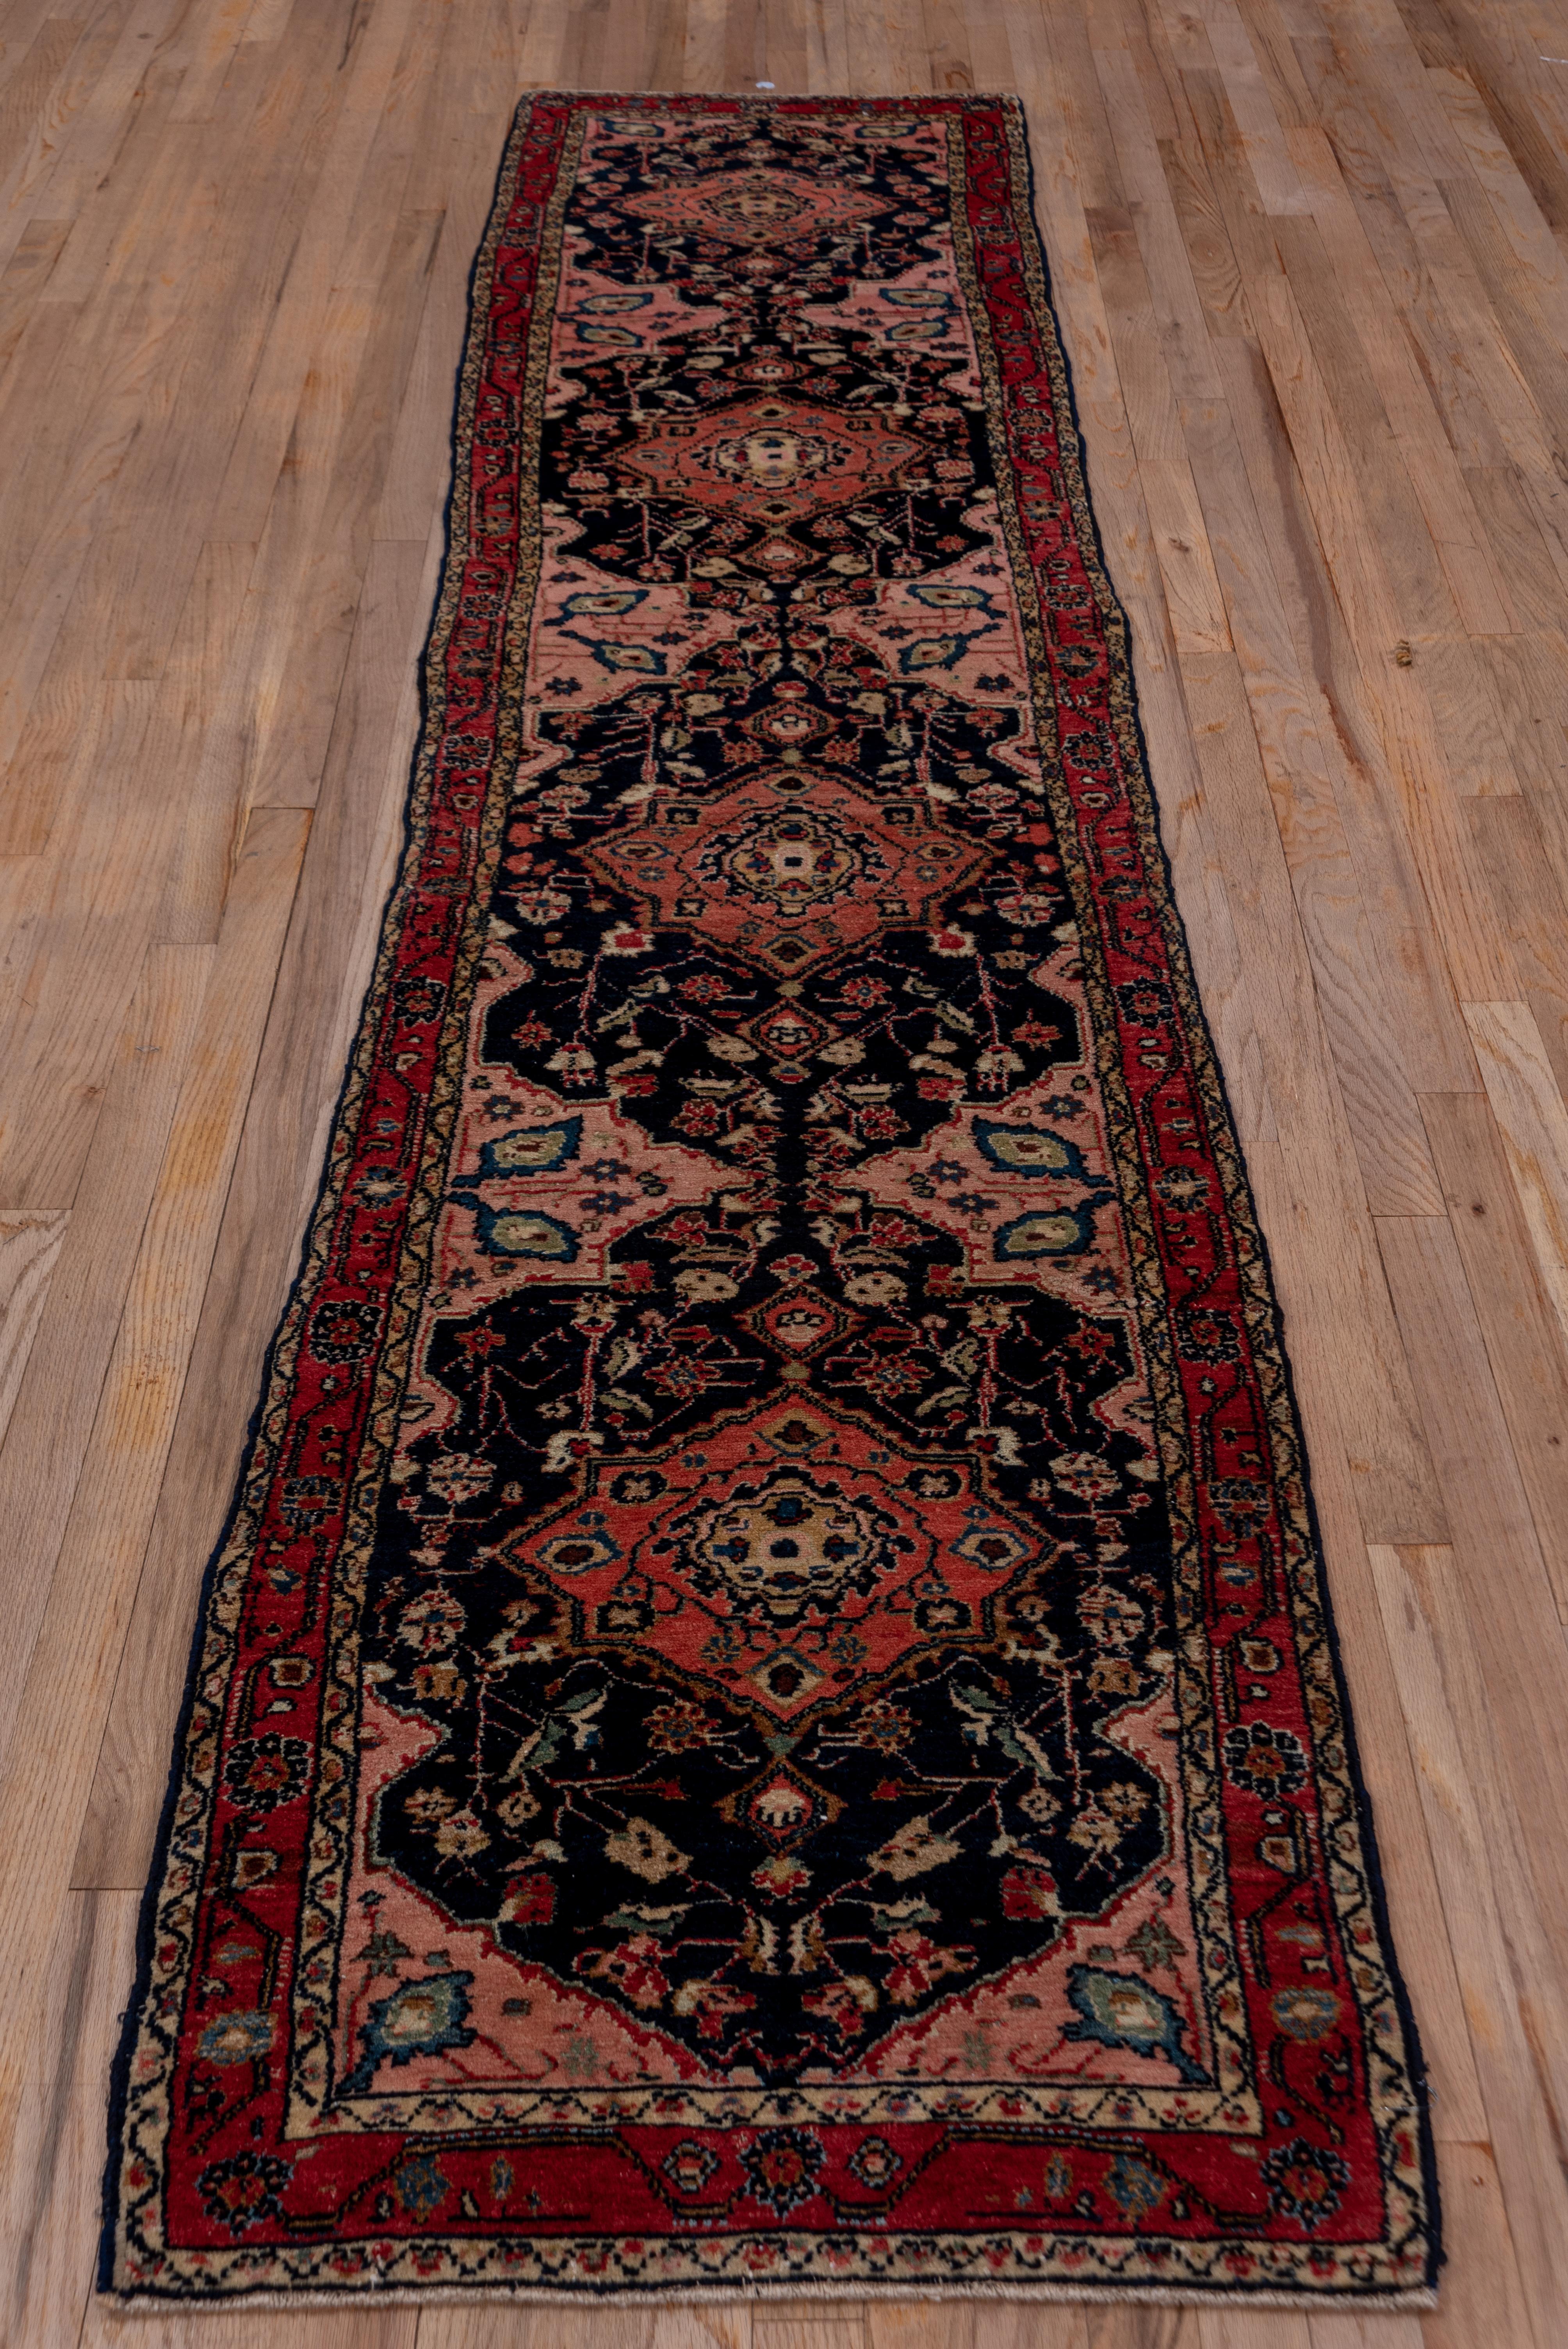 The navy field of this very good condition west Persian village runner features rose octogram medallions, flowering tendrils and fractional side fillers. The red border displays a rosette and undulating geometric vine. Light and medium blue, pale